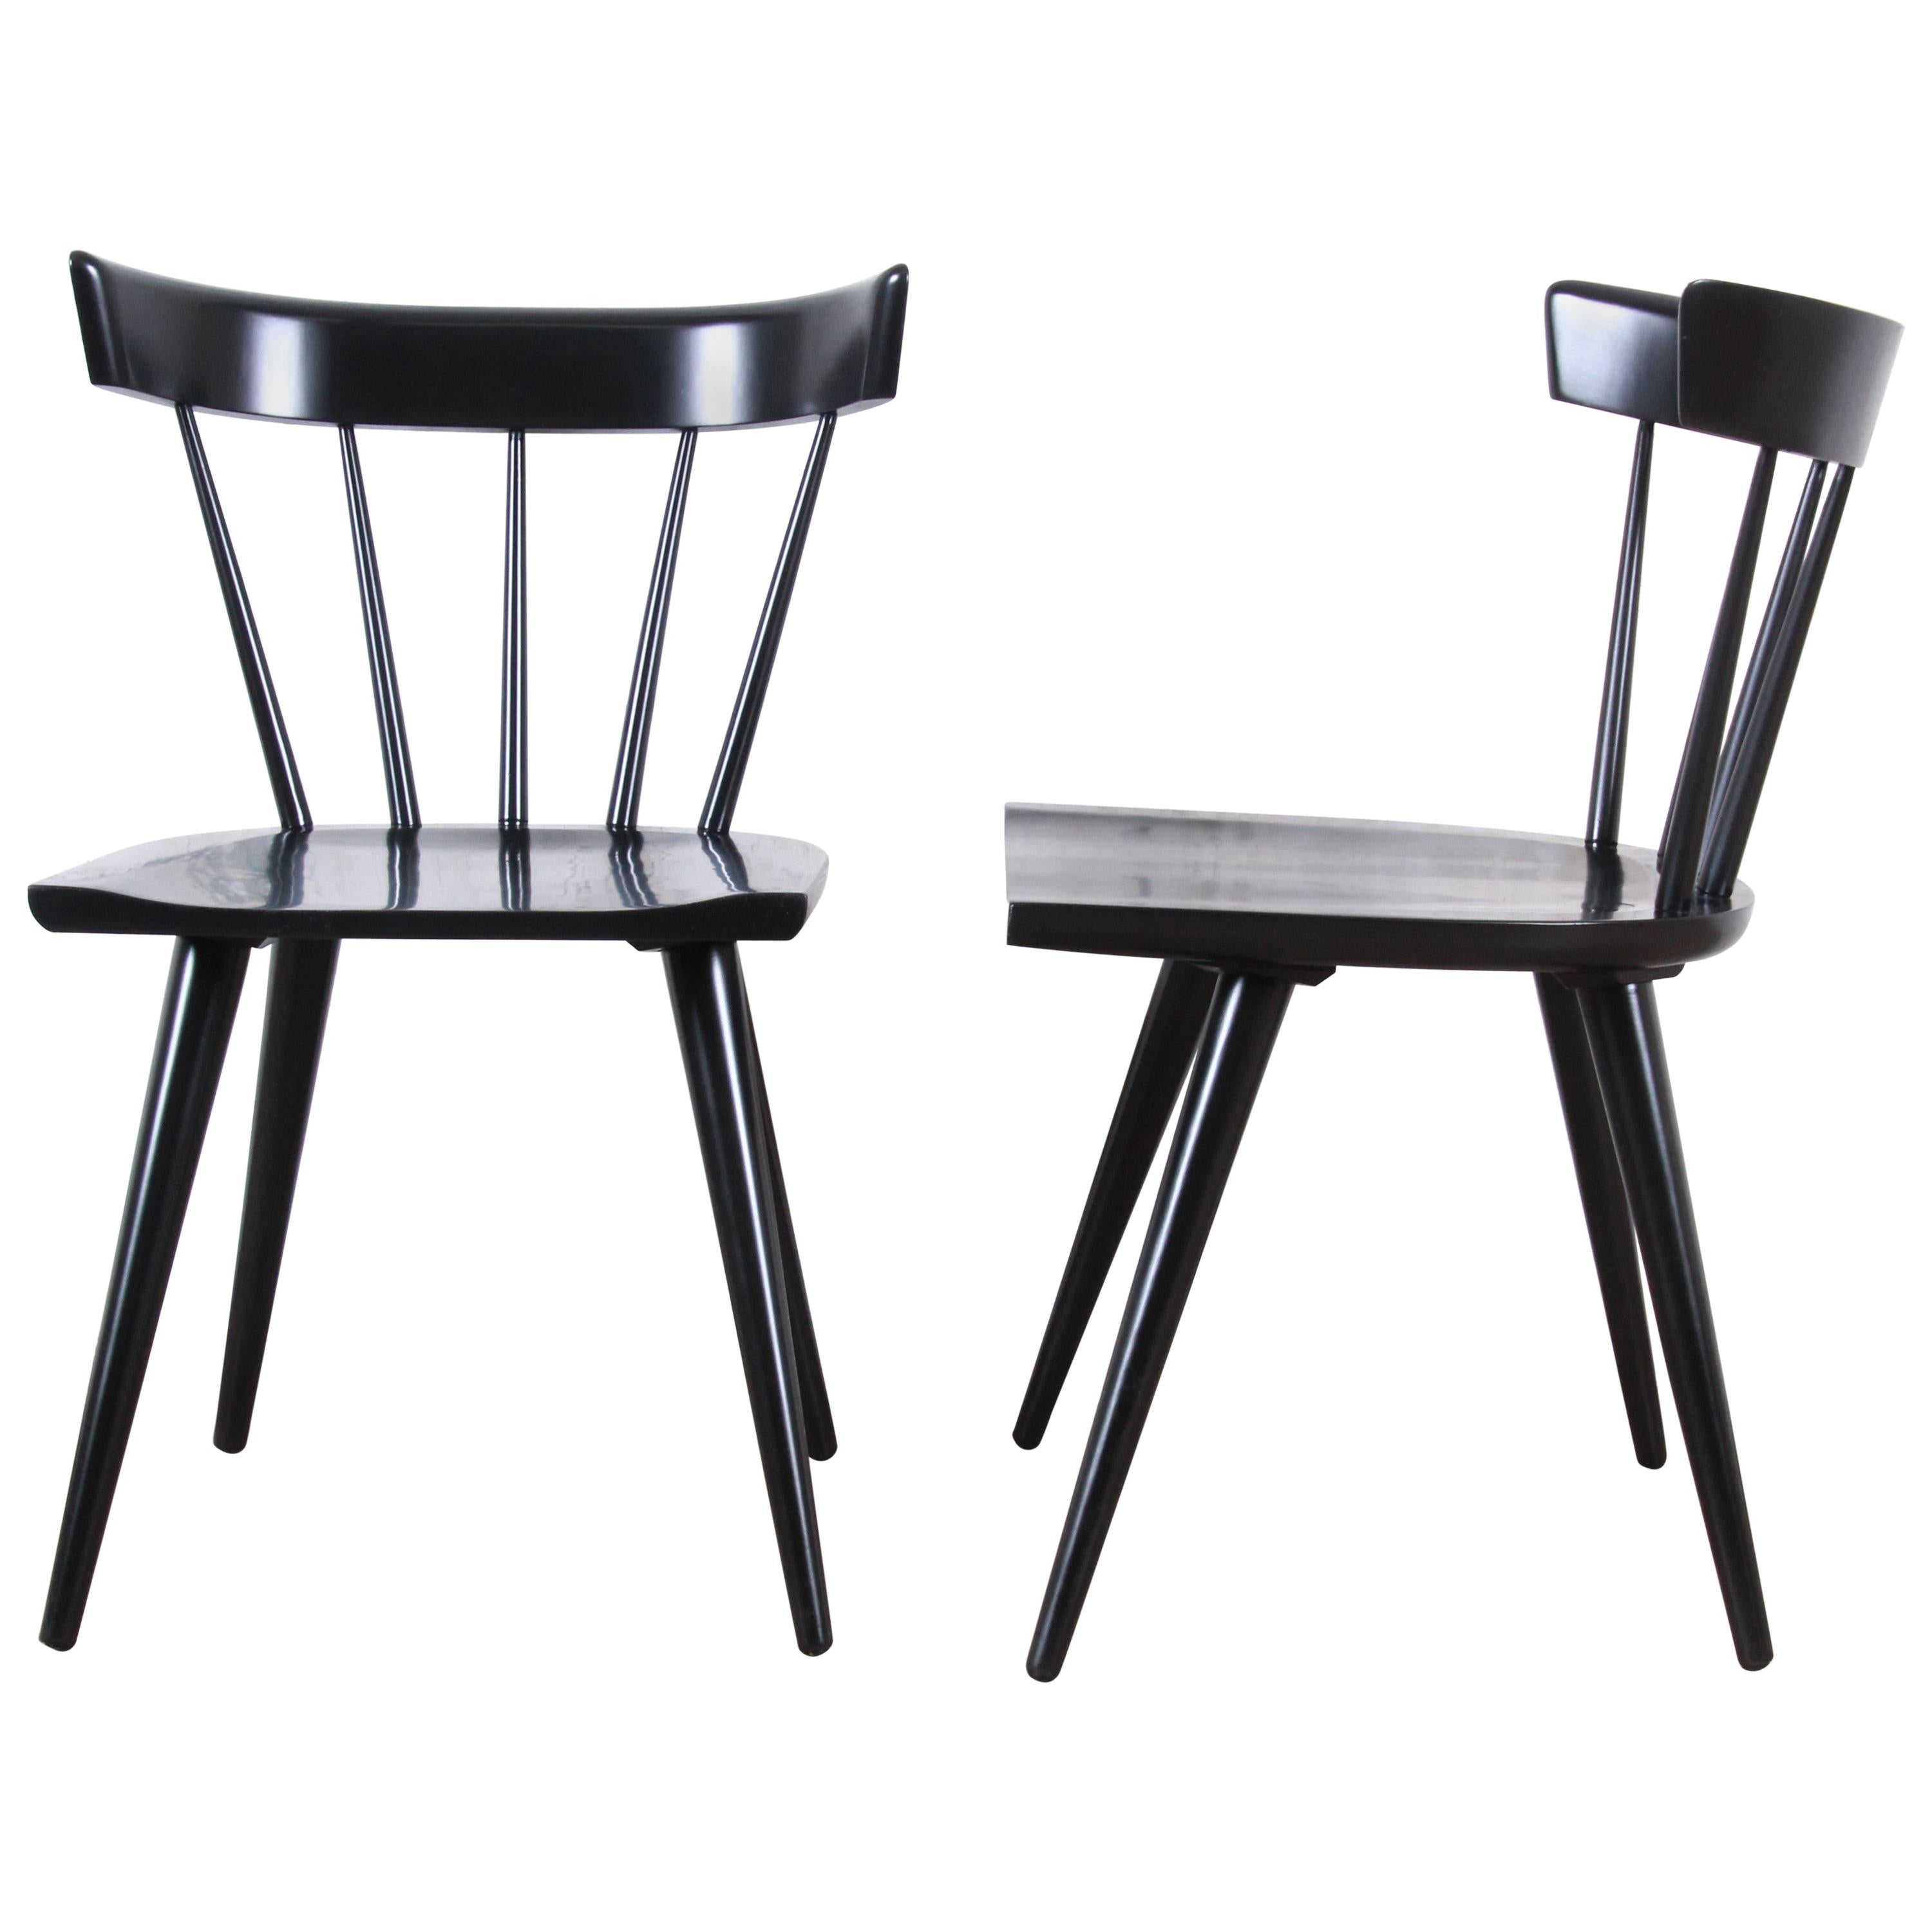 Paul McCobb Planner Group Black Lacquered Spindle Back Dining Chairs, Pair